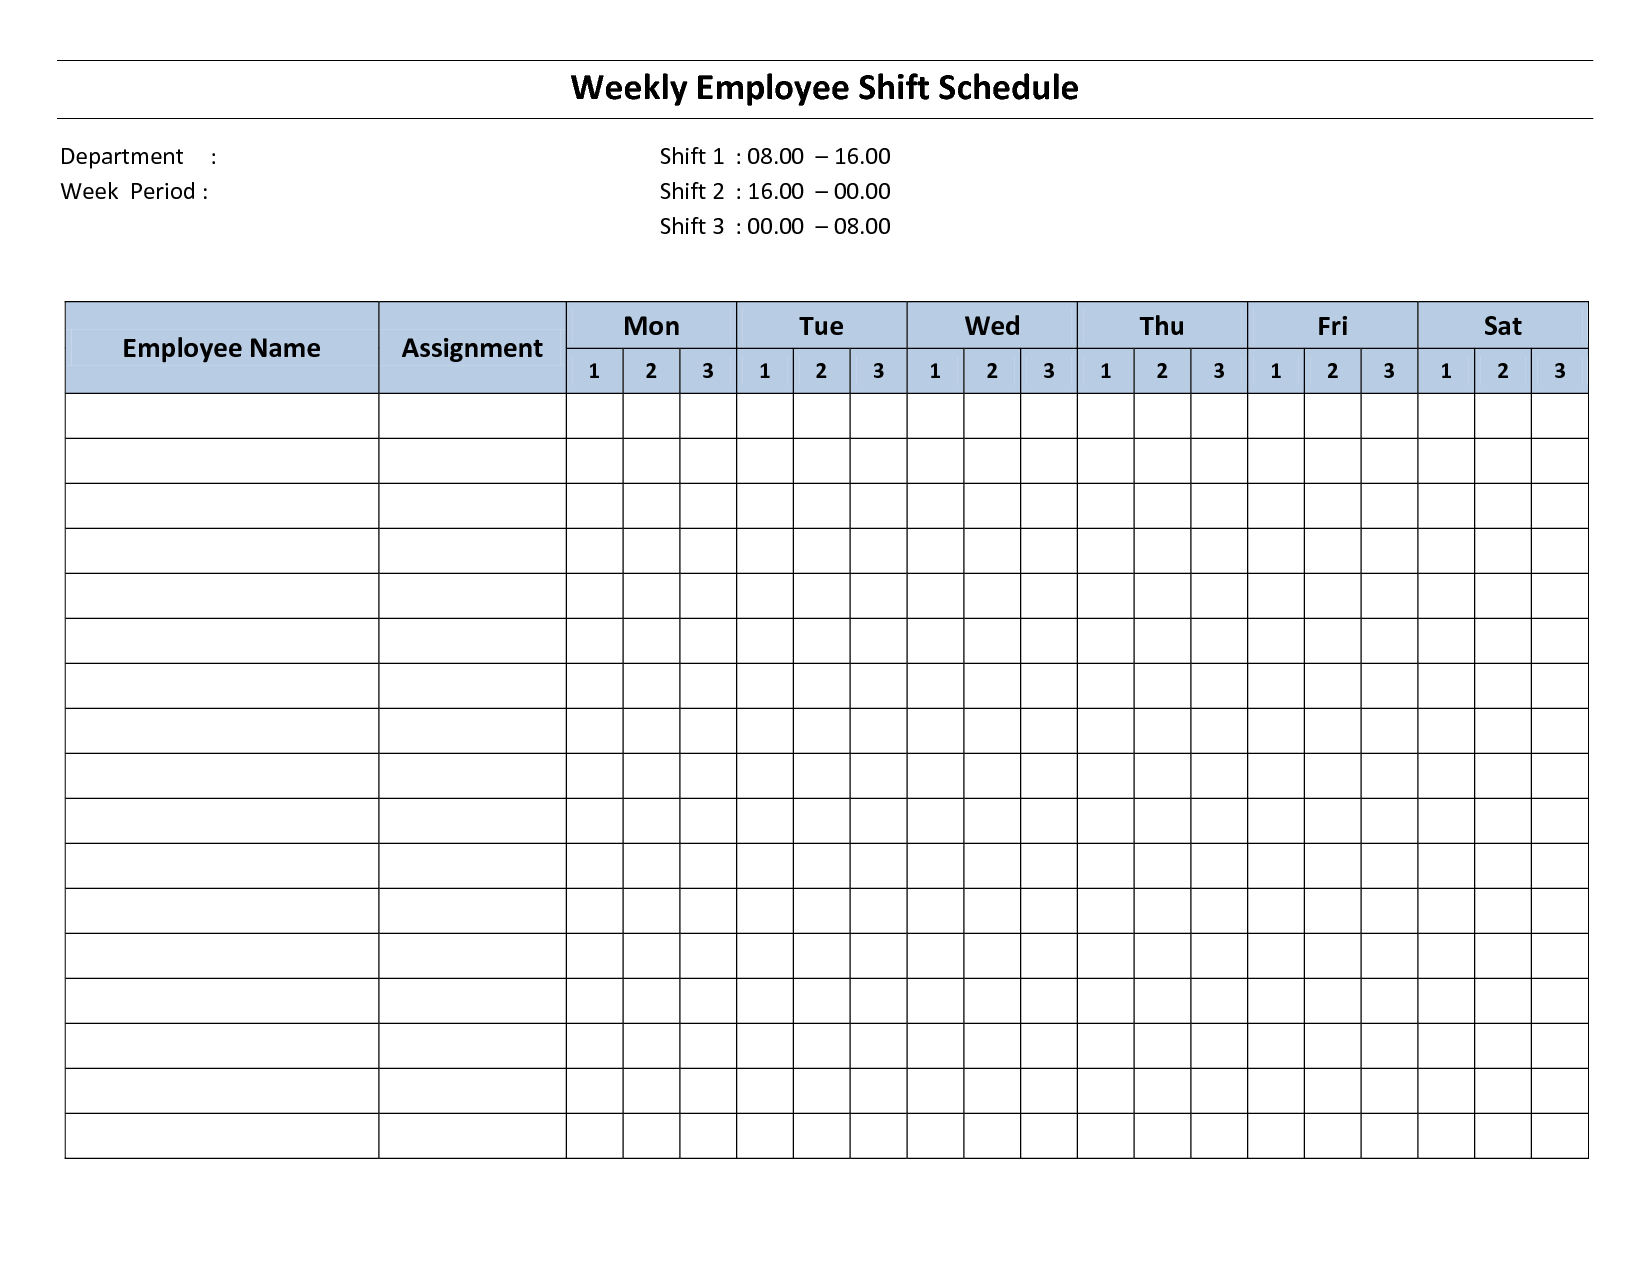 Weekly Employee Shift Schedule - 8 Hour Shift | Cleaning